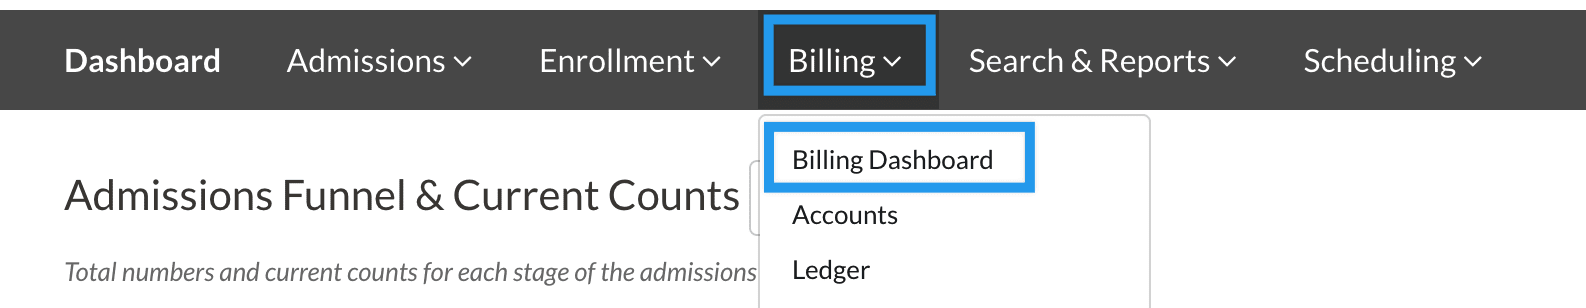 Billing menu opened to show the location of the Billing Dashboard page.